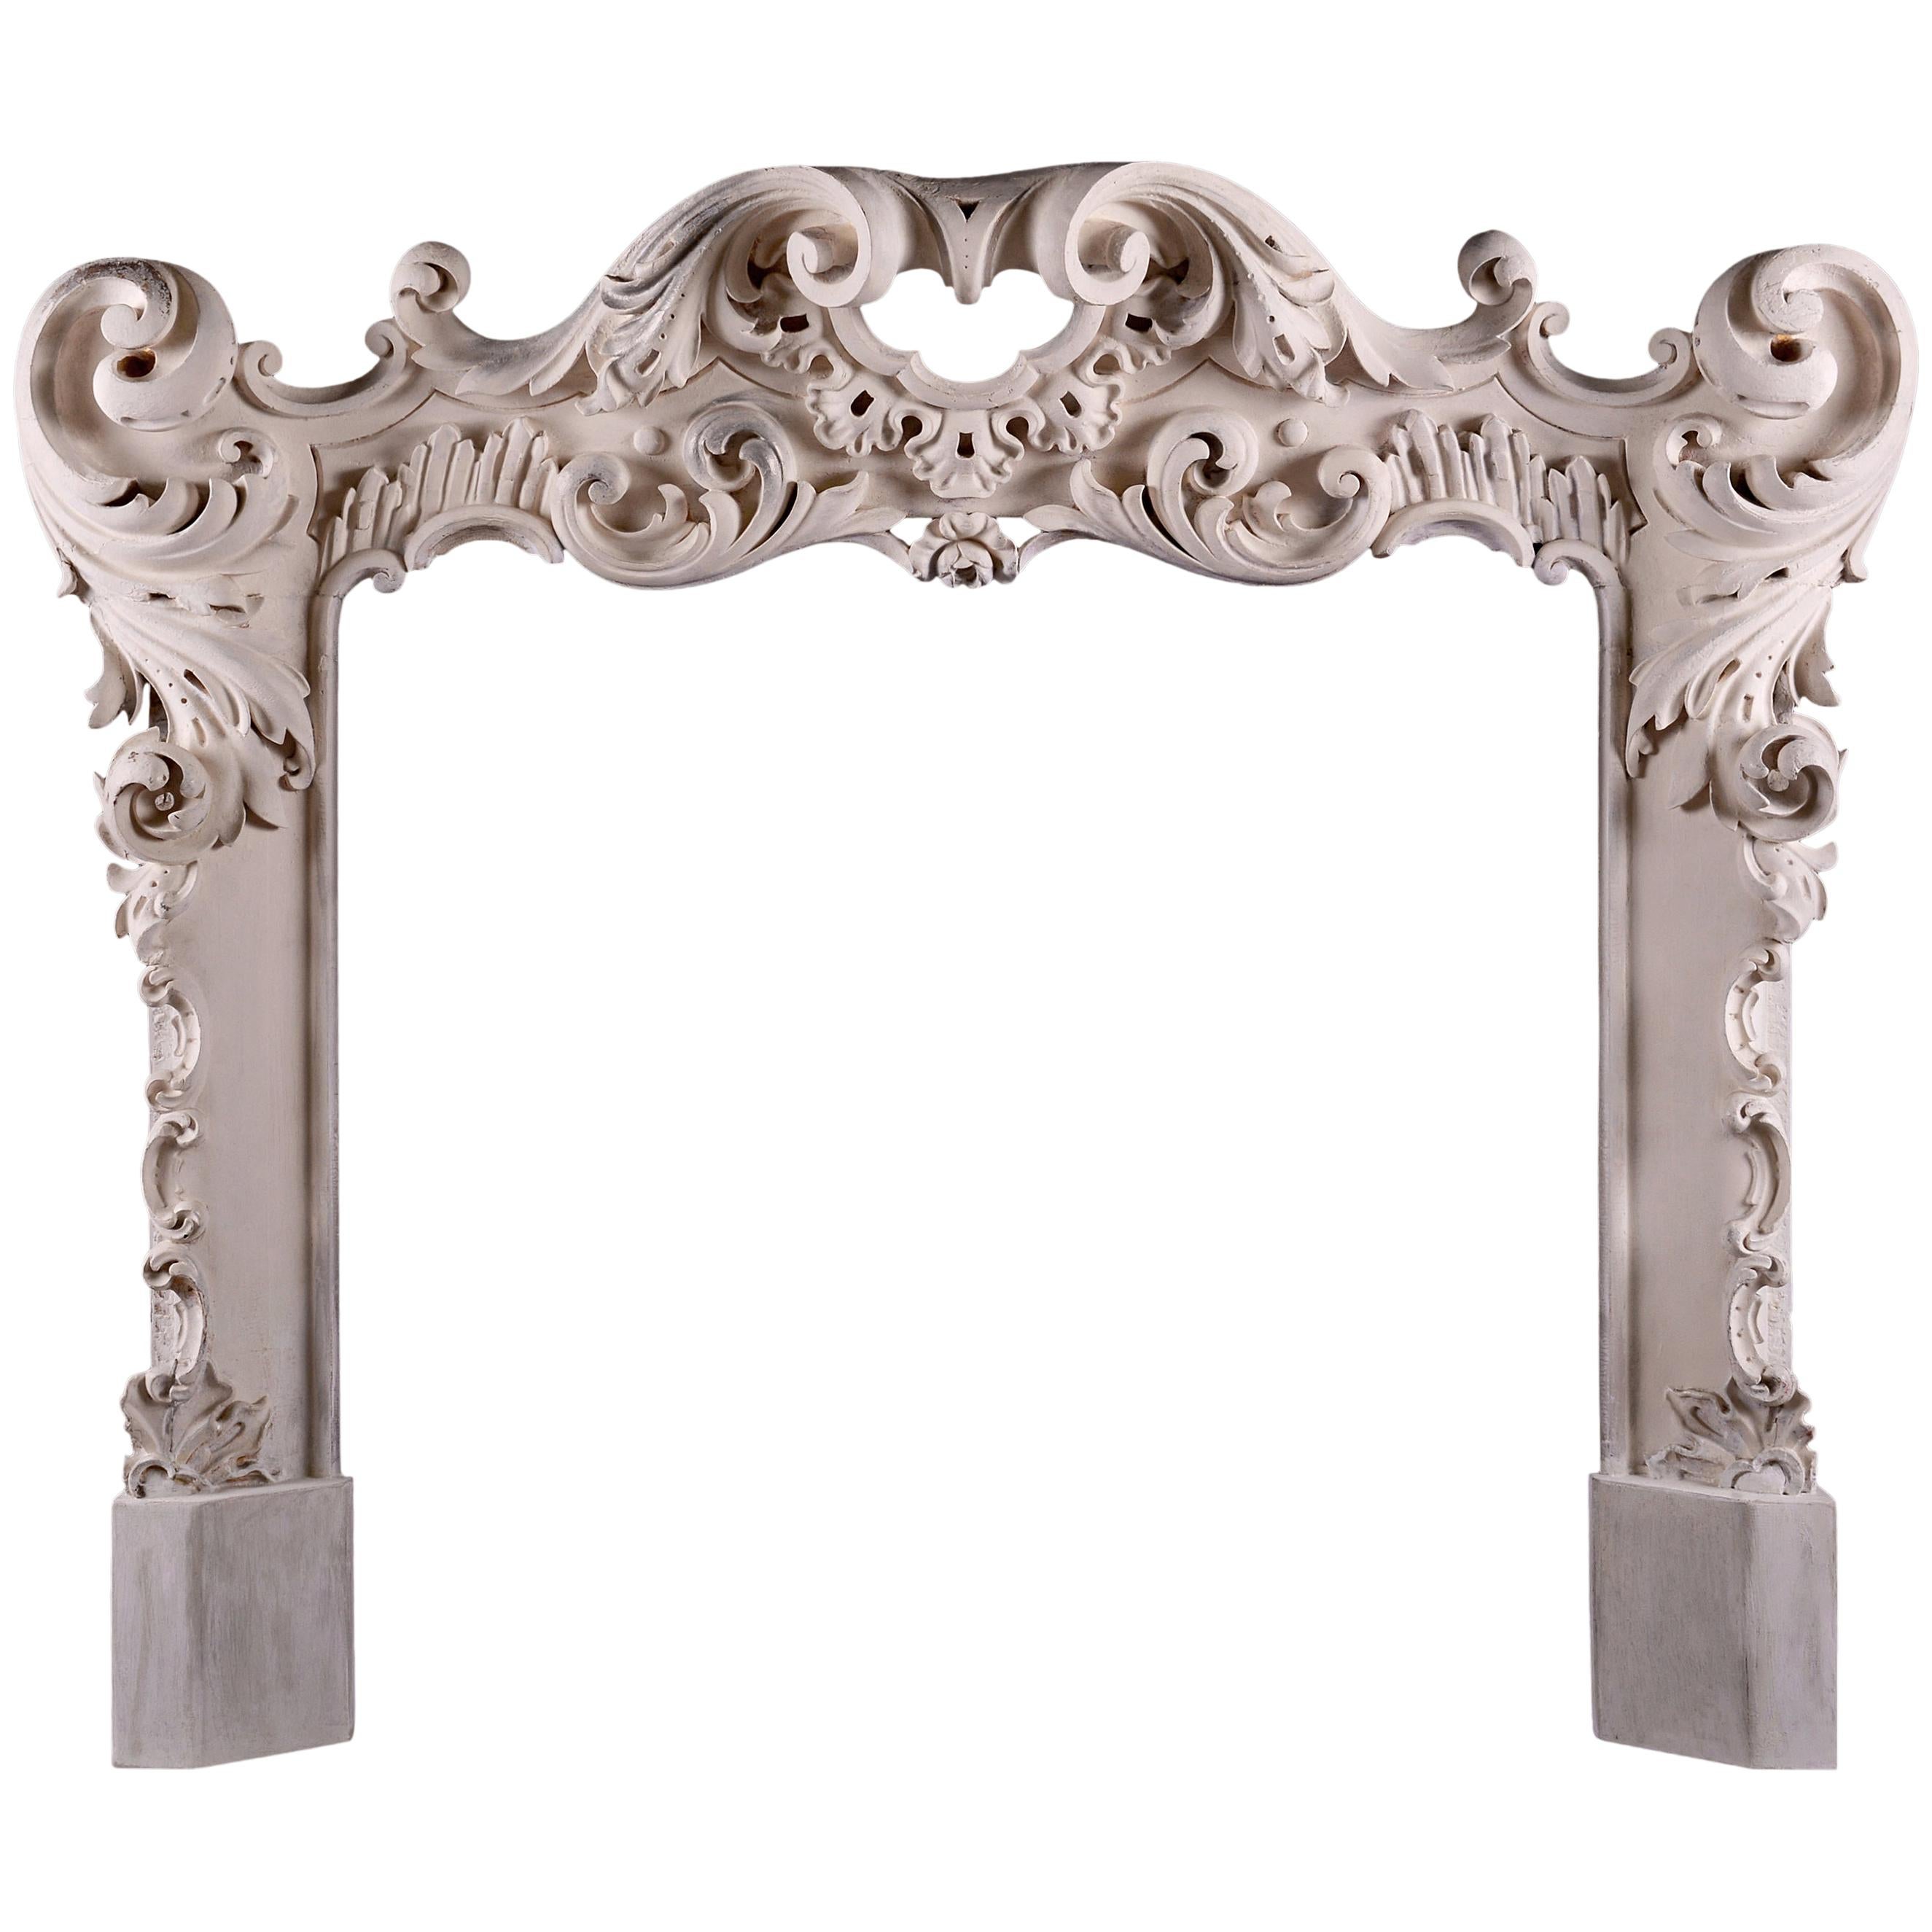 Highly Decorative Rococo Timber Fireplace